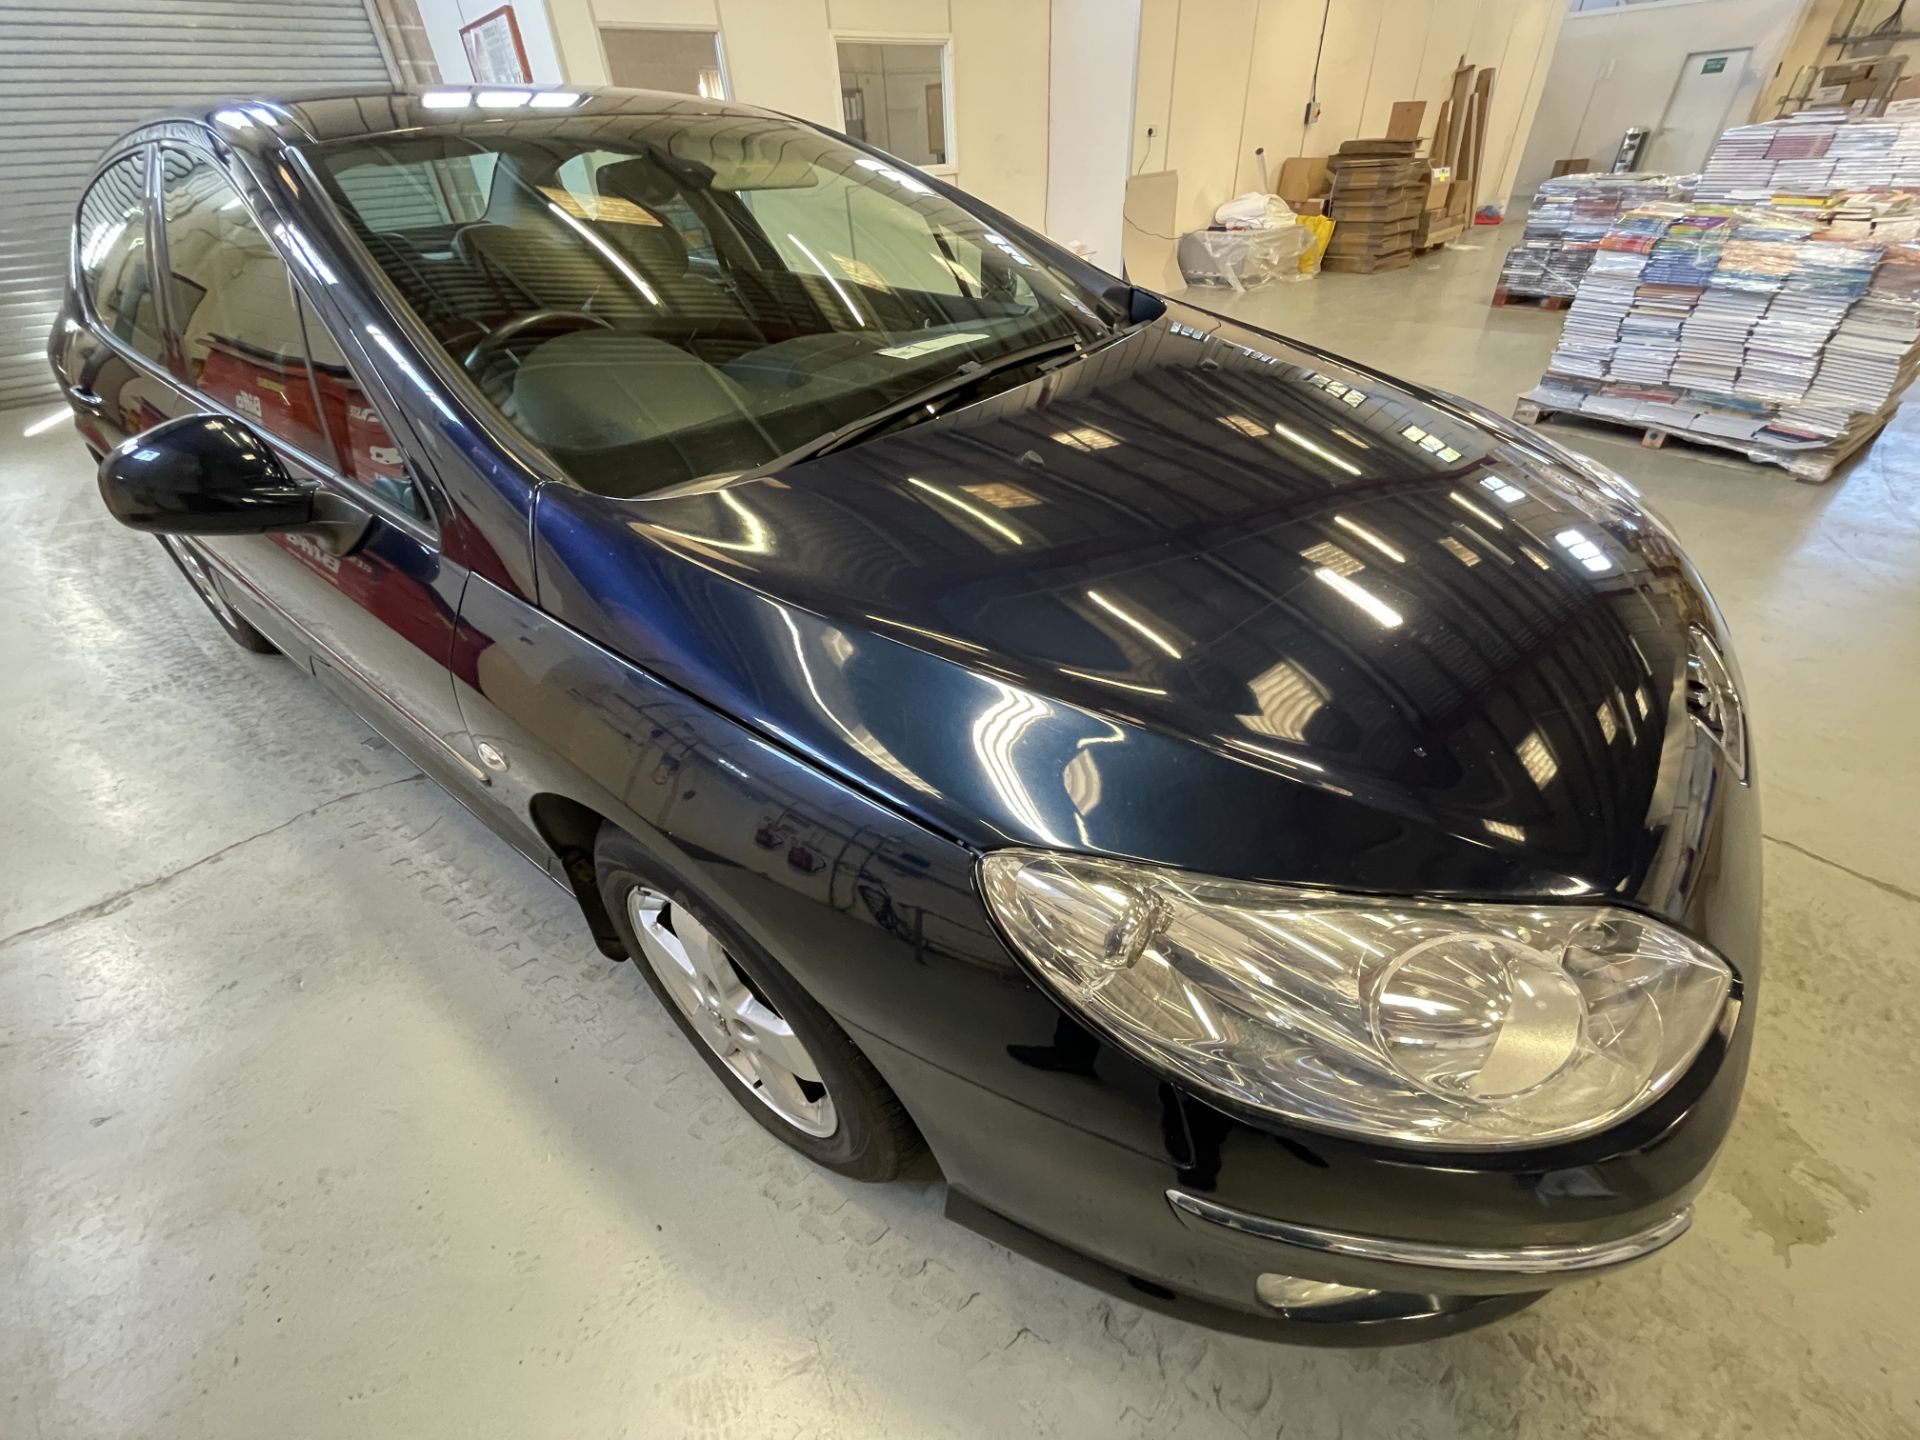 Peugeot 407 SPORT 2.0 HDi 140 DIESEL ENGINE FOUR DOOR SALOON, registration no. SY59 UTF, indicated